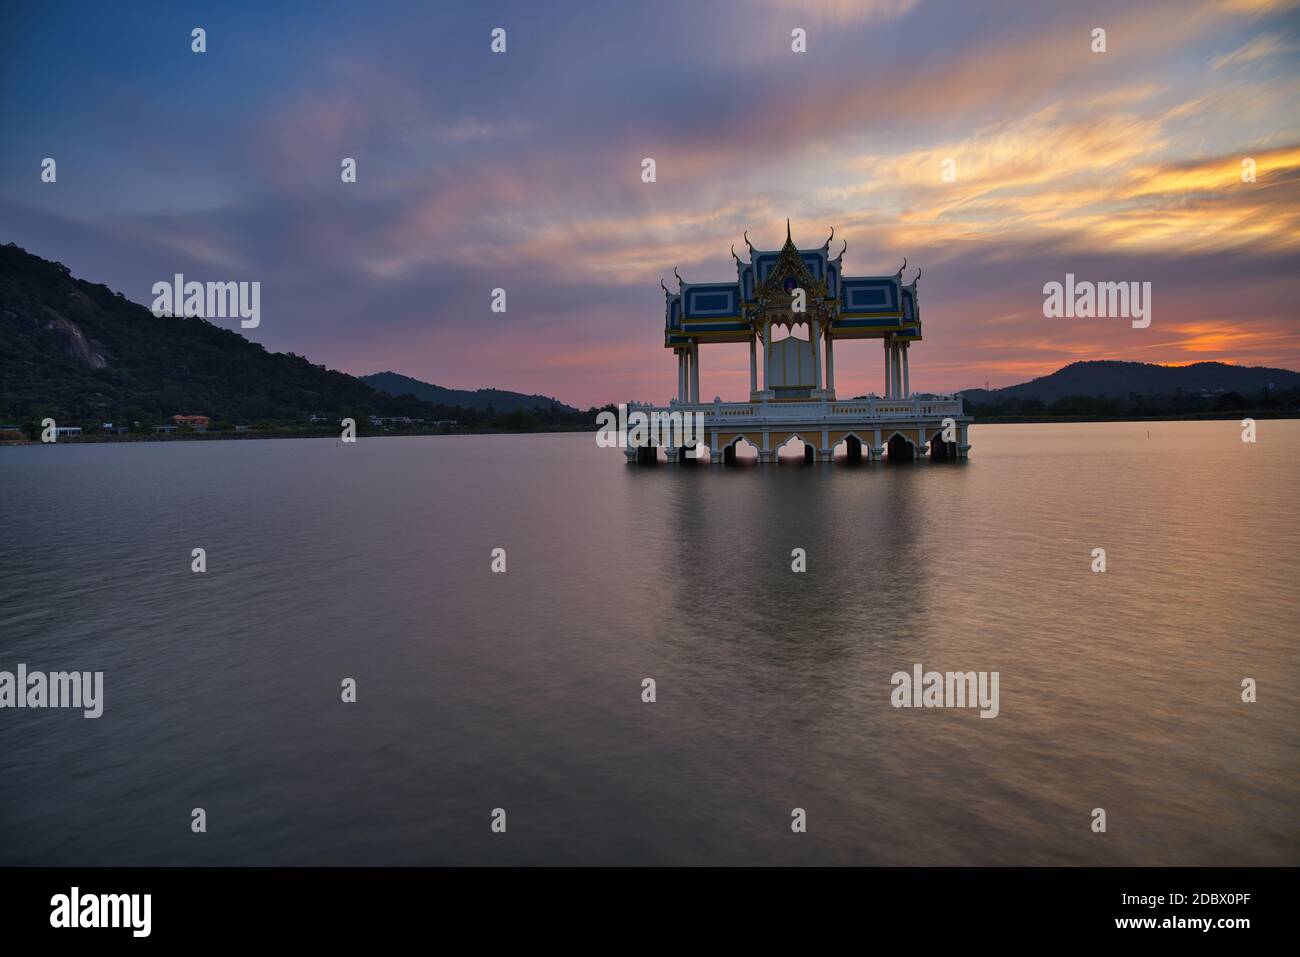 Buddhist shrine on a lake in Hua Hin in Thailand at sunset! The temple is reflected in the water and the sky turns red! Stock Photo